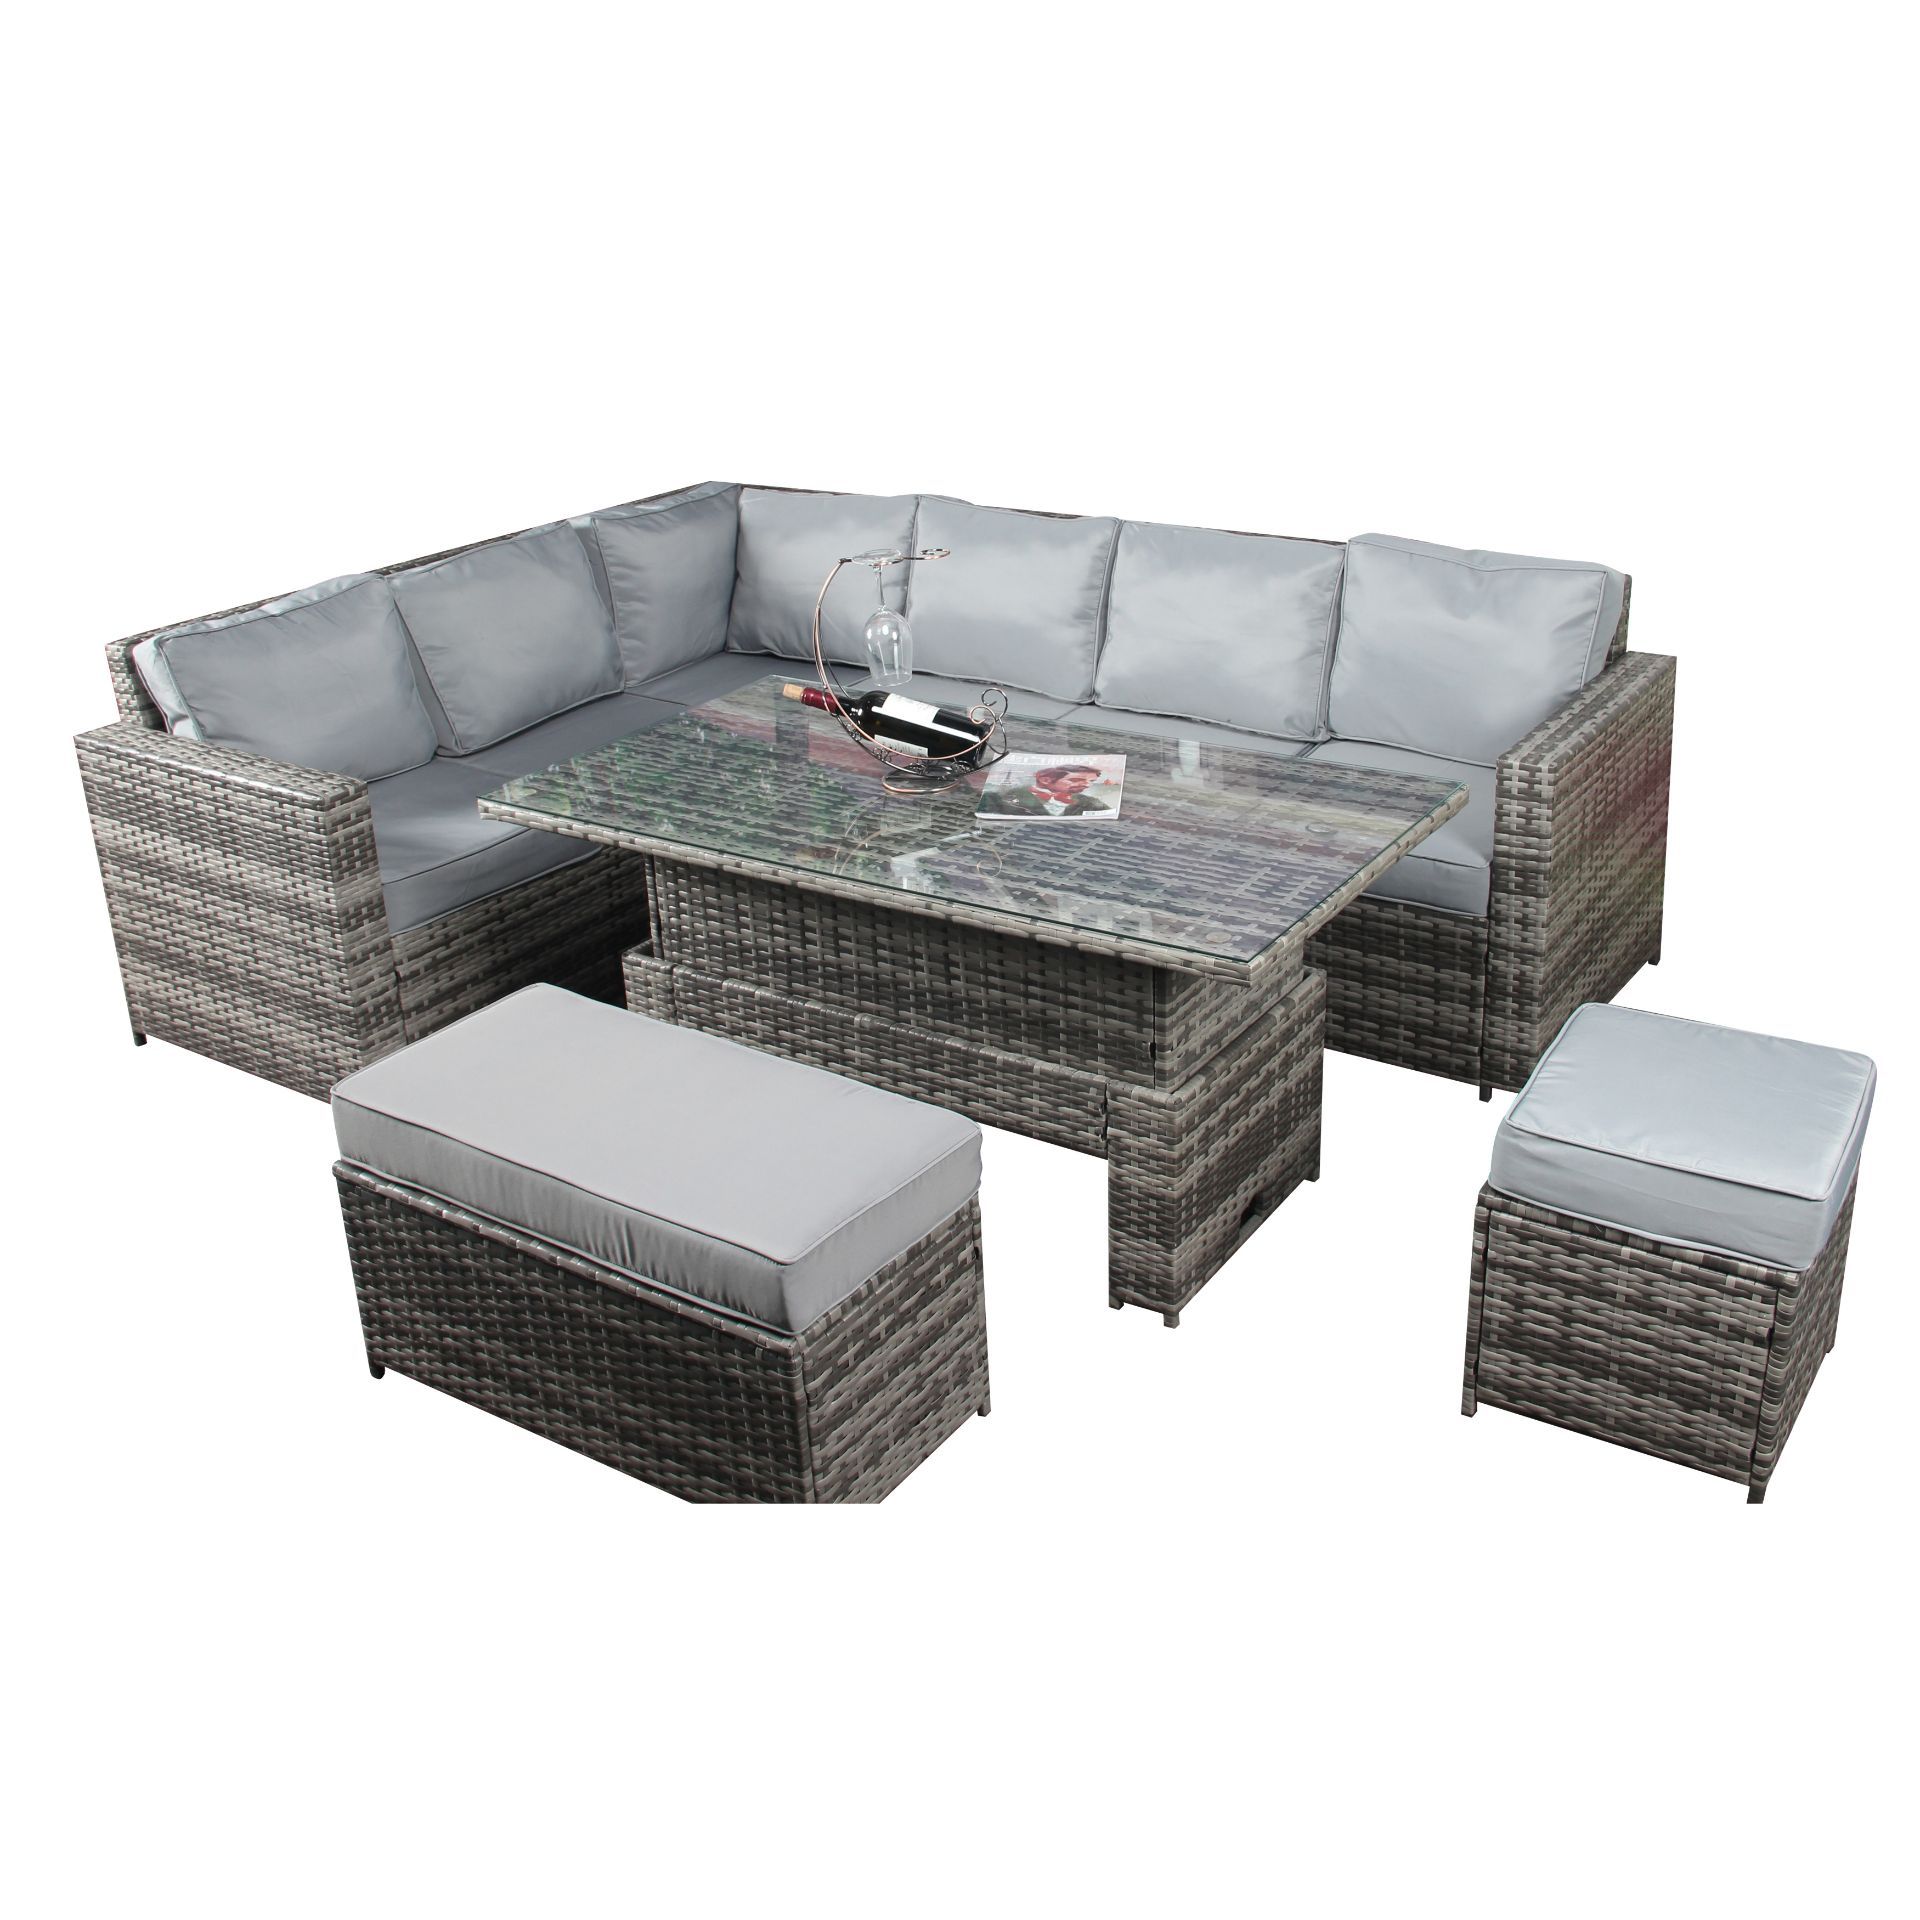 Brand new Rattan set 8 seater corner set with rise and lowering table *PLUS VAT* - Image 3 of 9